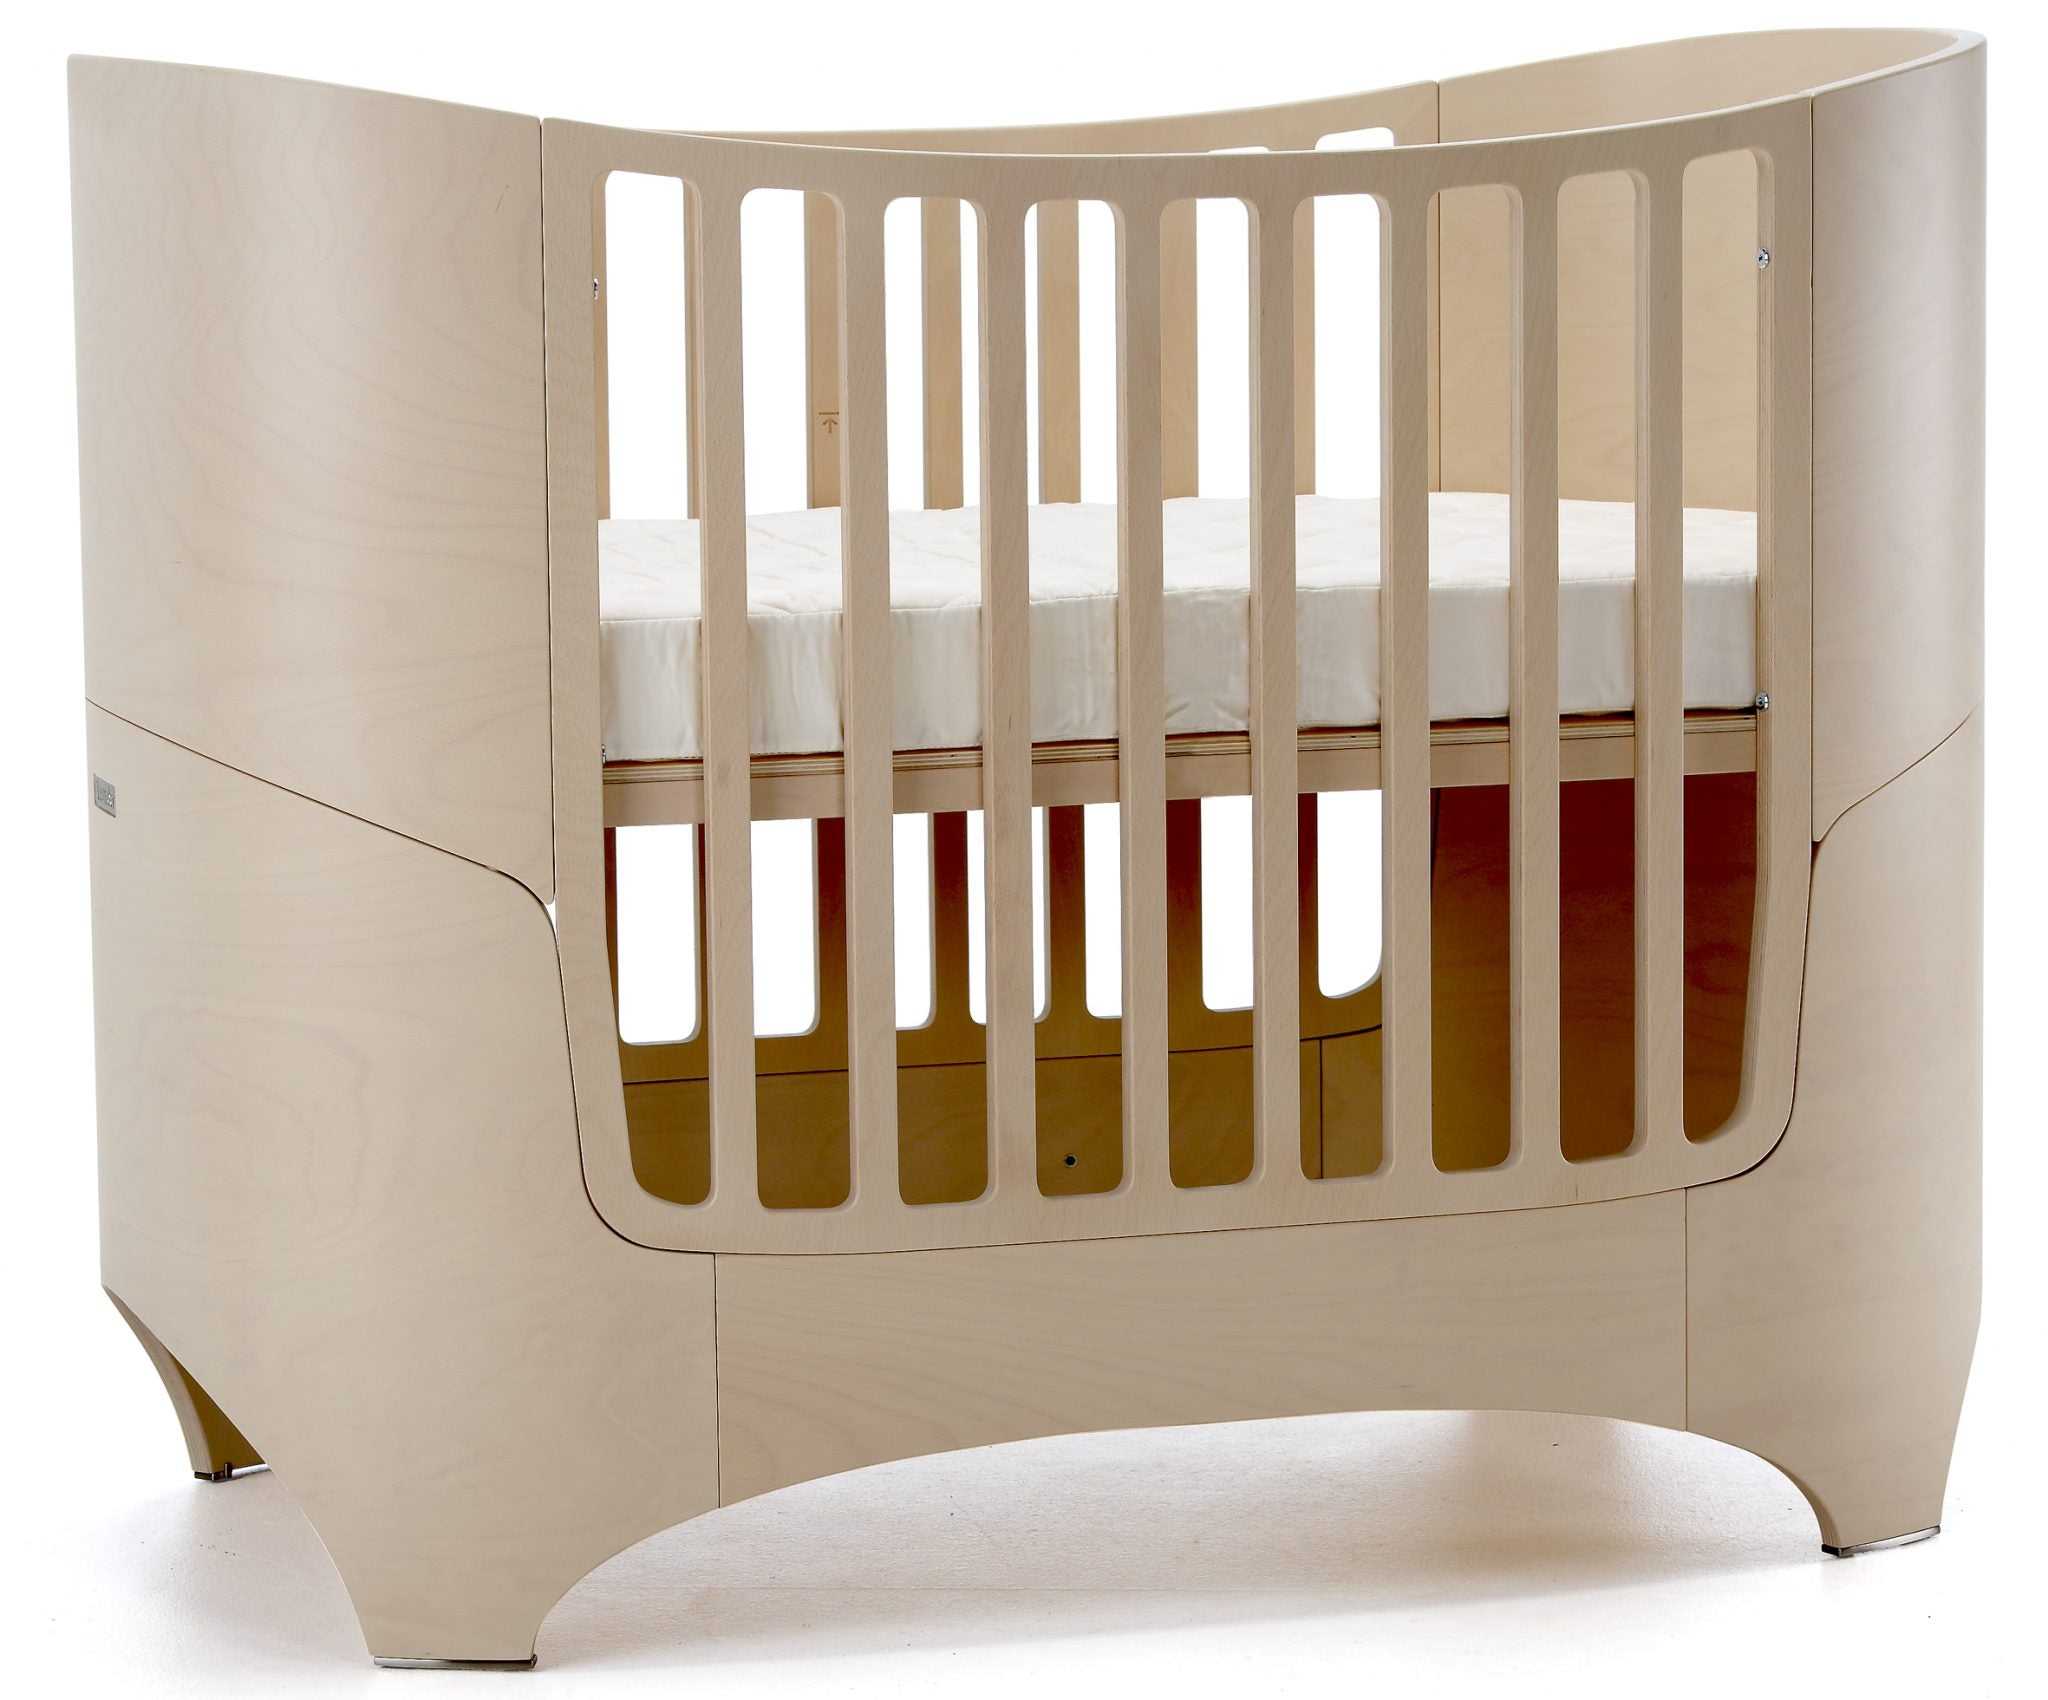 Leander Classic Cot Only WHITE WASH